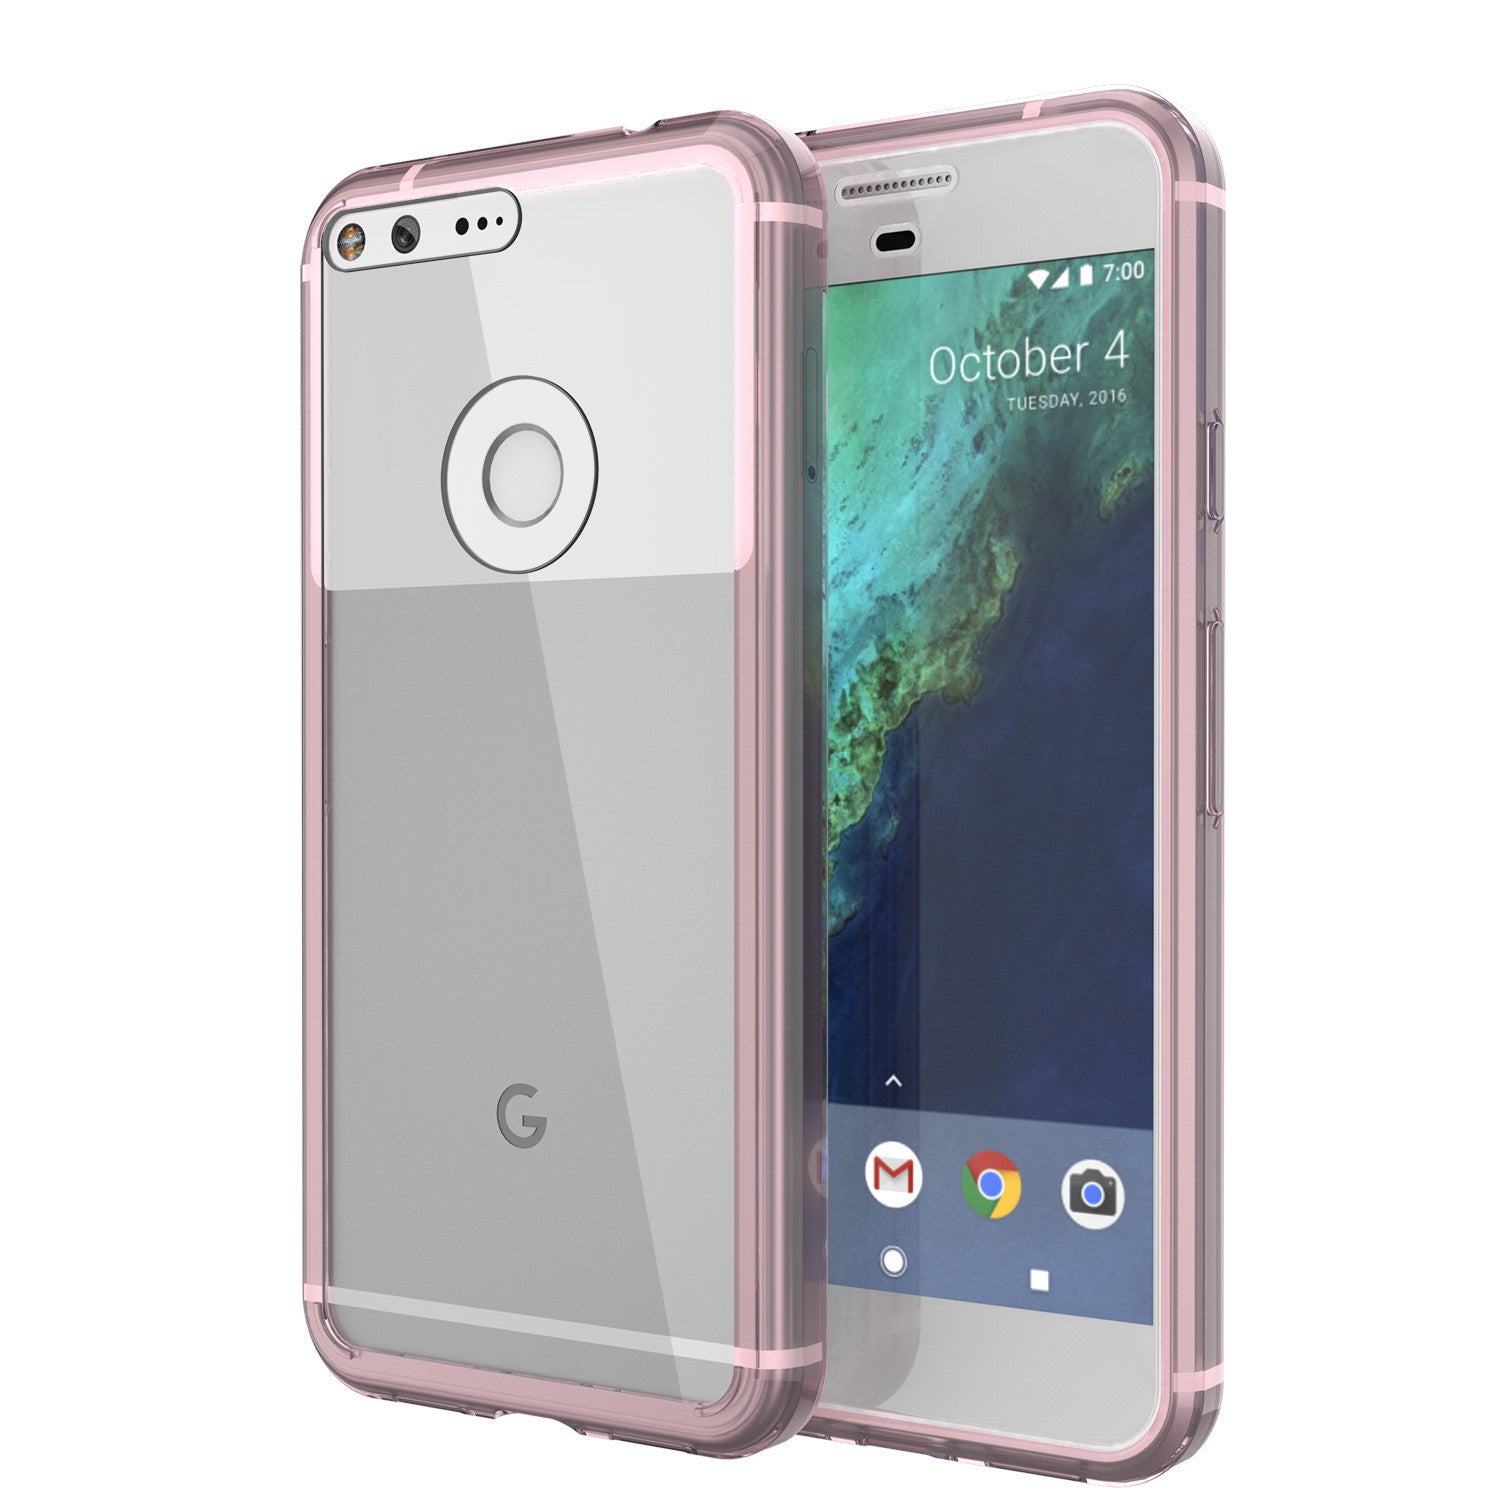 Google Pixel Case Punkcase® LUCID 2.0 Crystal Pink Series w/ PUNK SHIELD Glass Screen Protector | Ultra Fit (Color in image: crystal pink)